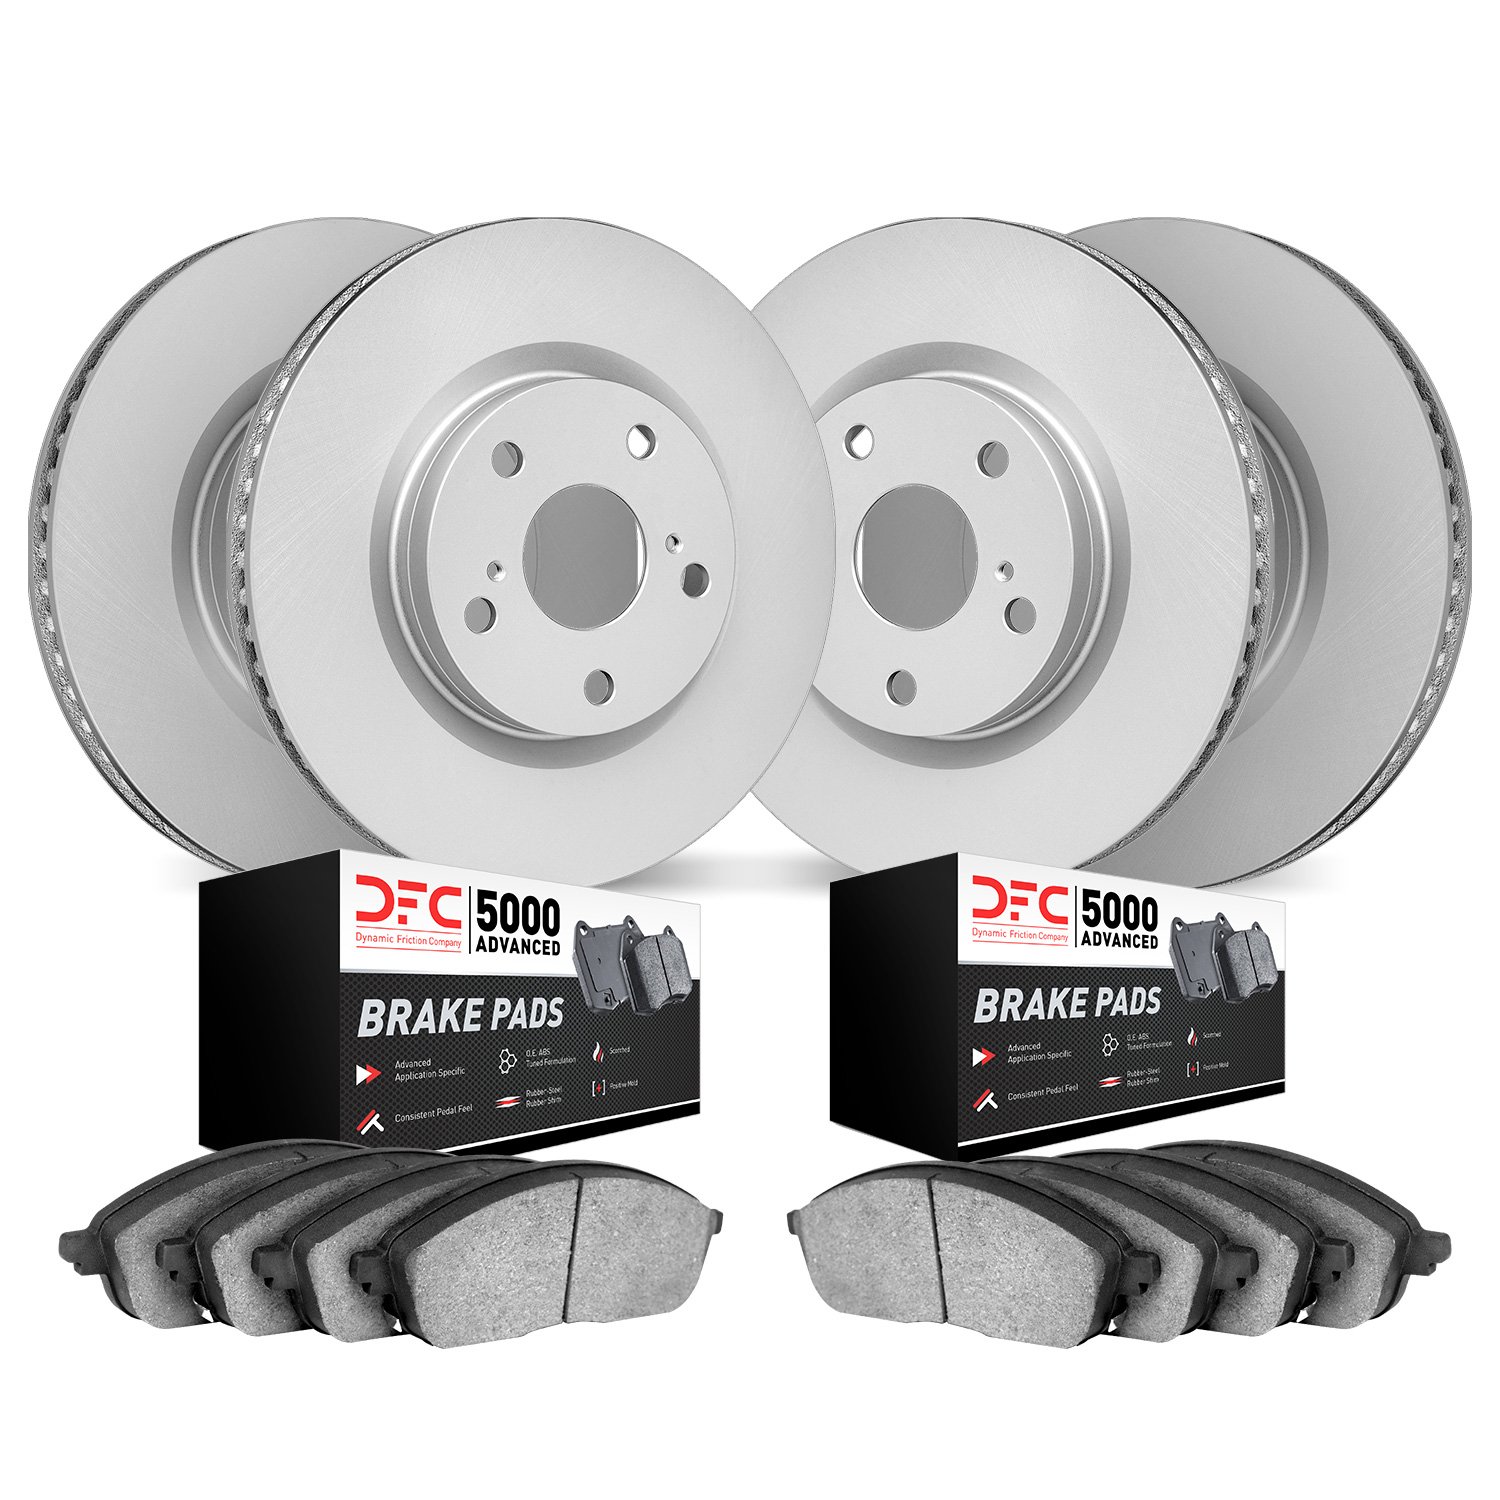 4504-45011 Geospec Brake Rotors w/5000 Advanced Brake Pads Kit, 2010-2017 GM, Position: Front and Rear